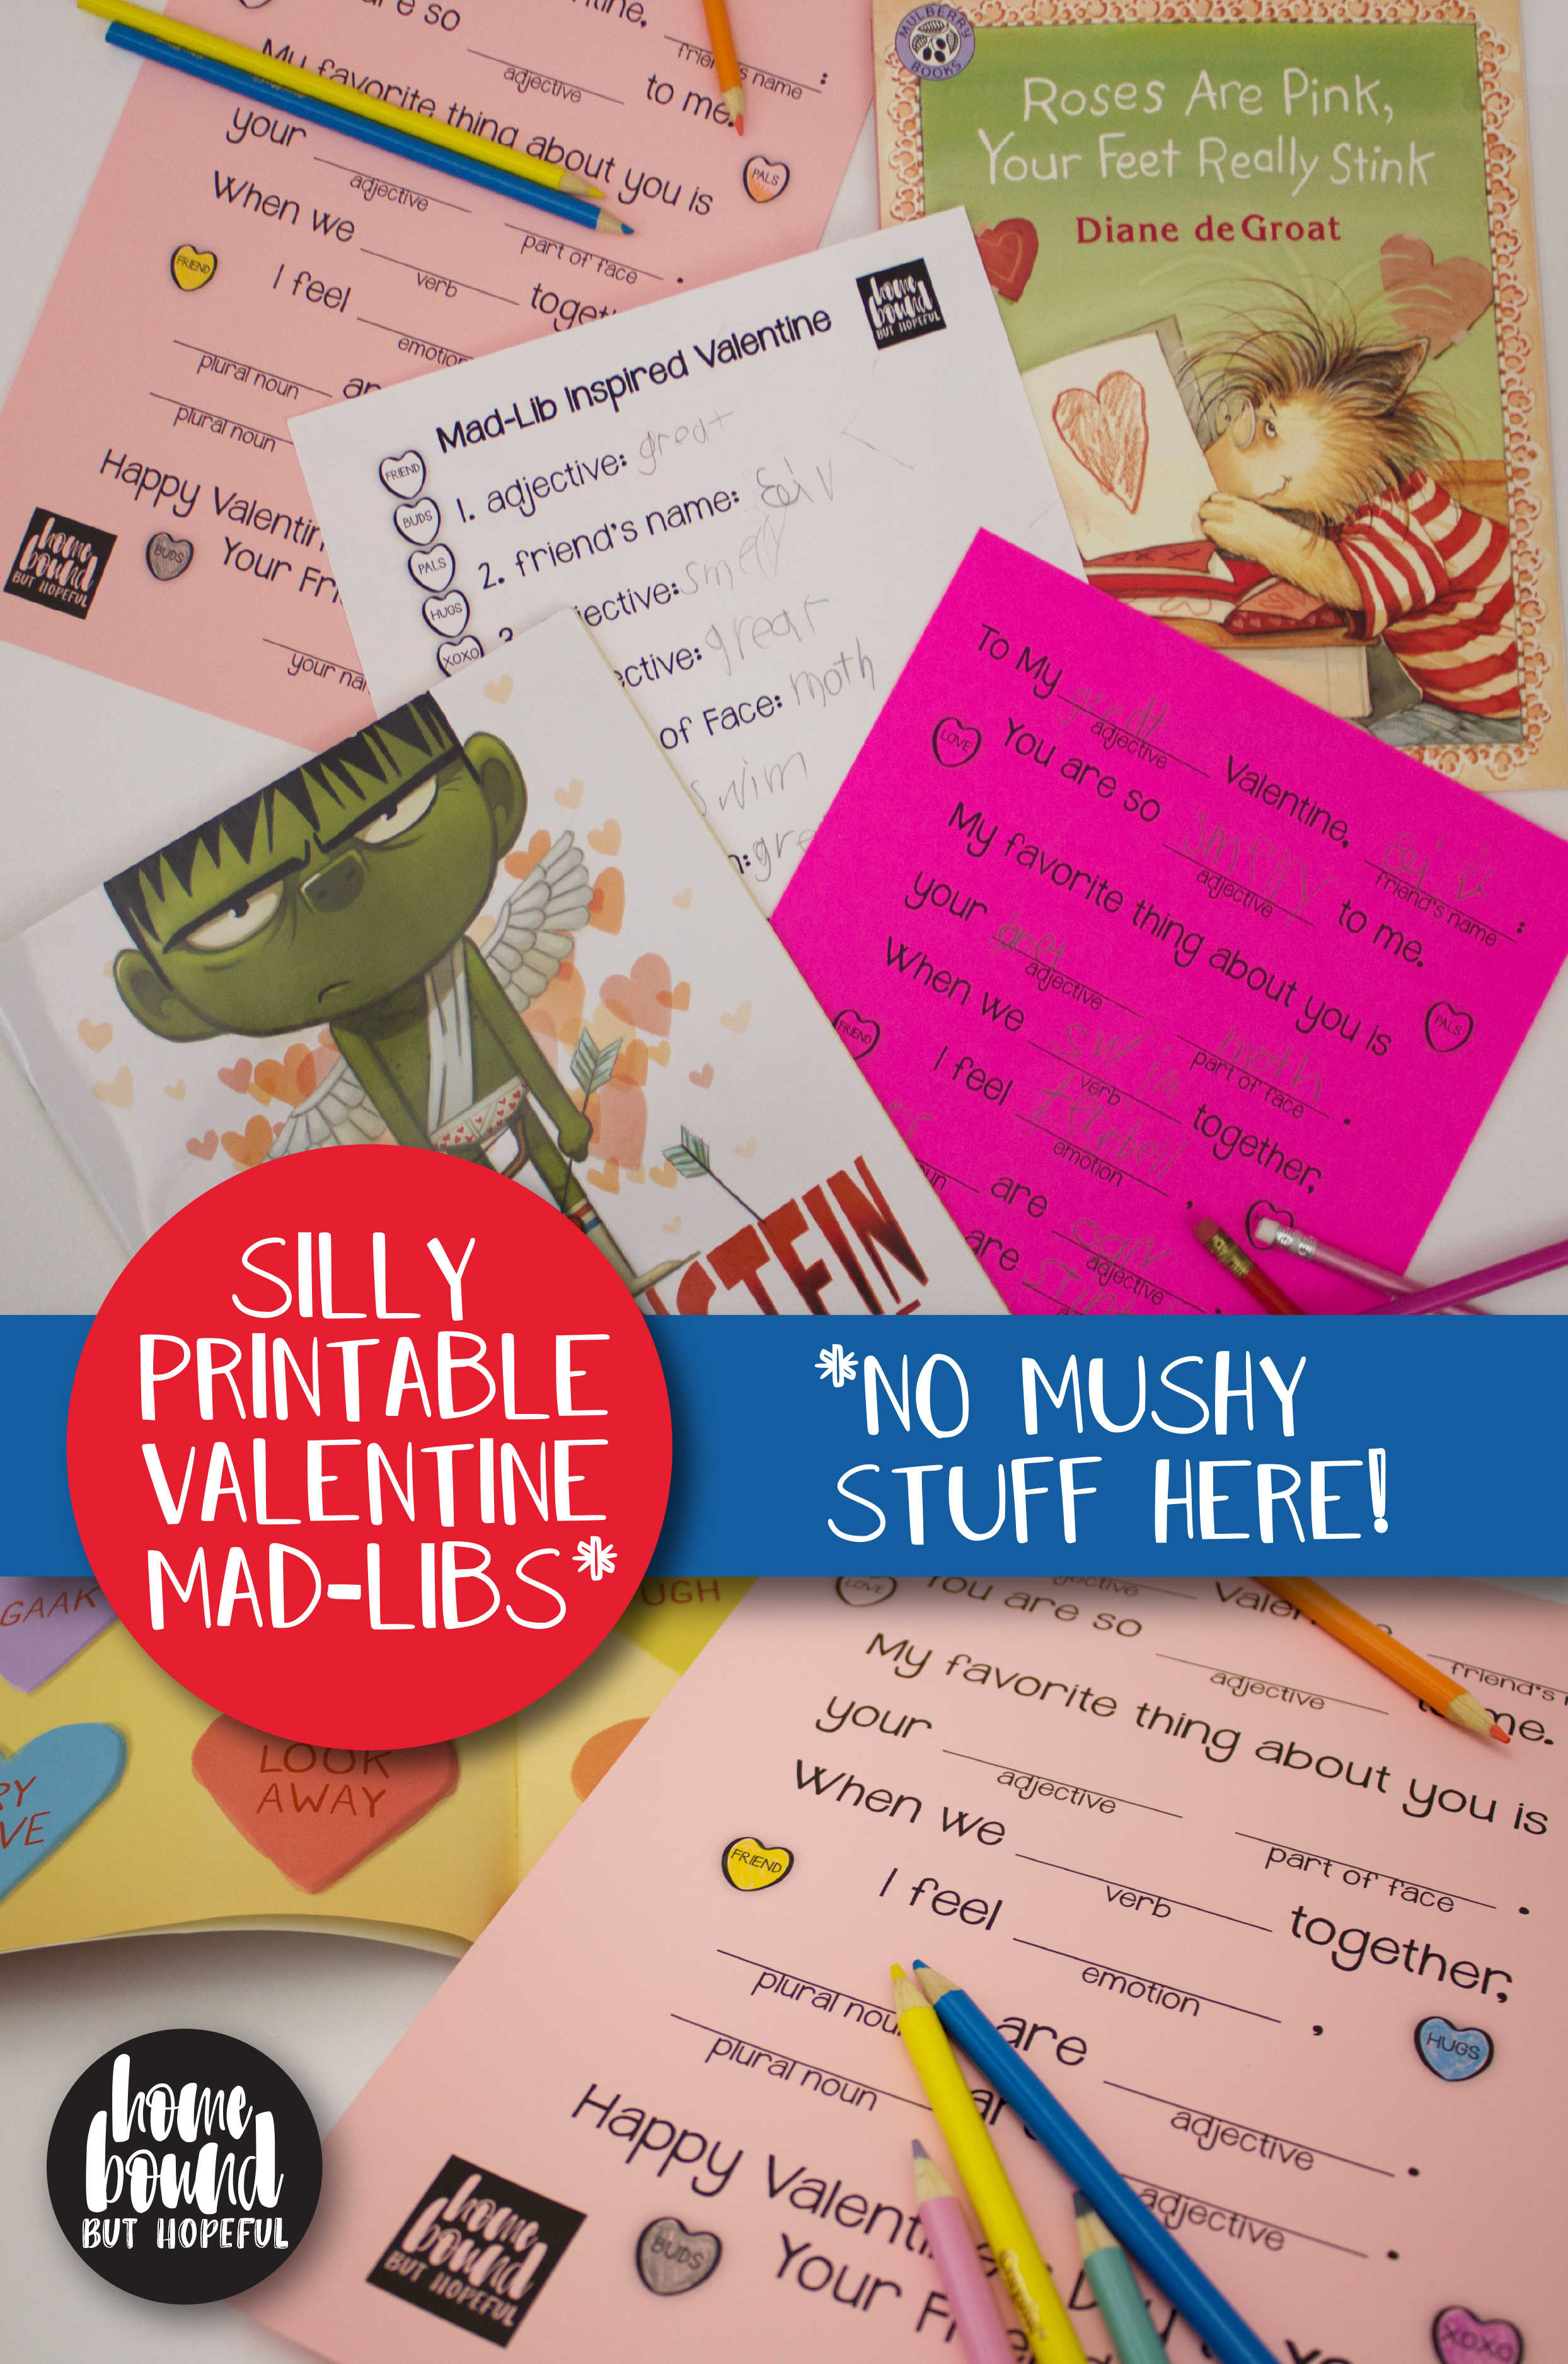 If your kids are NOT feeling the love this Valentine's Day, we've got the perfect books for them! Plus a silly Mad Libs Valentine printable, inspired by "A Crankenstein Valentine" and "Roses Are Pink, Your Feet Really Stink!"